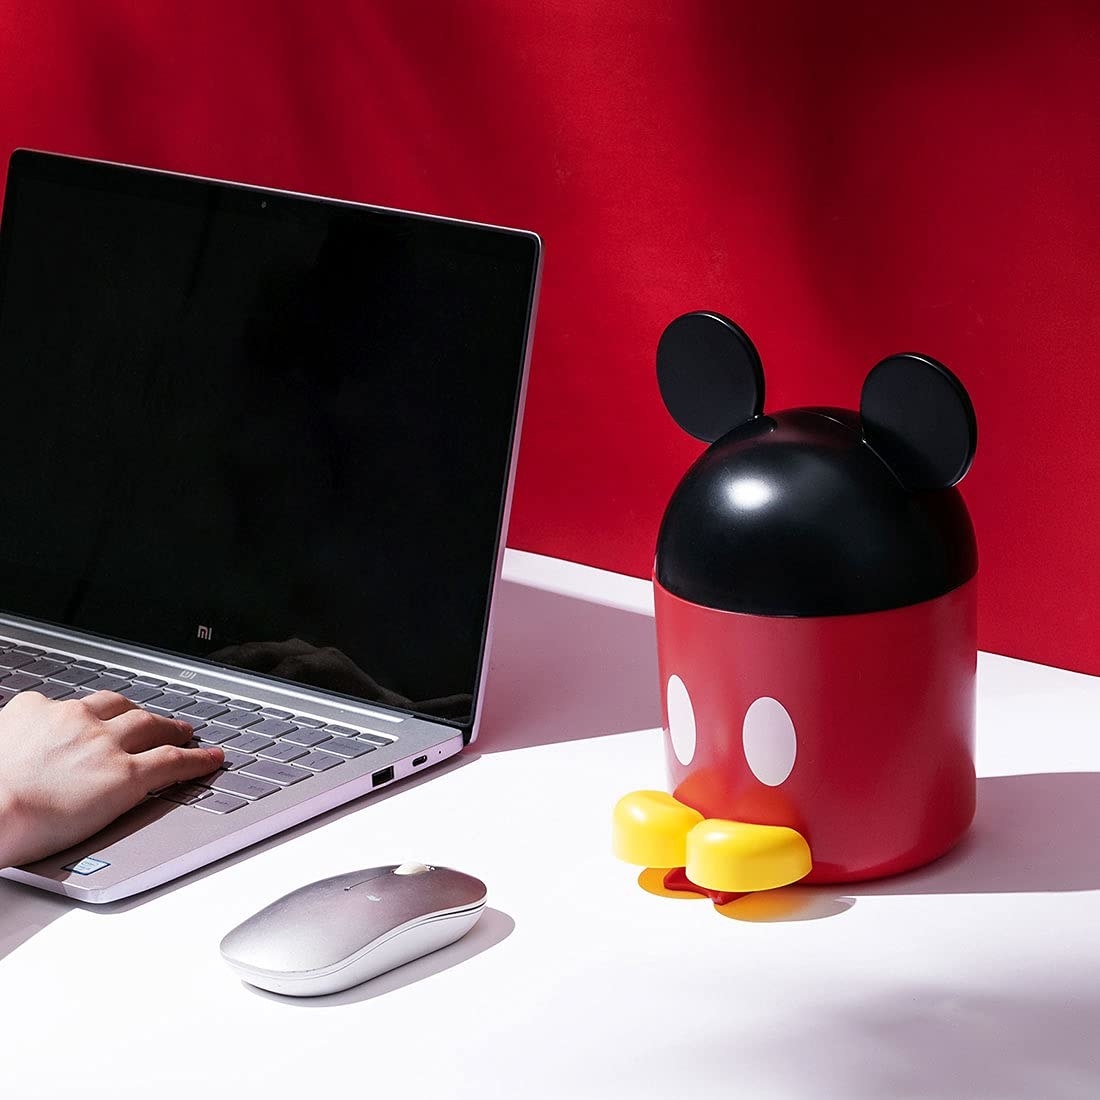 A Mickey Mouse storage container next to a keyboard and a mouse